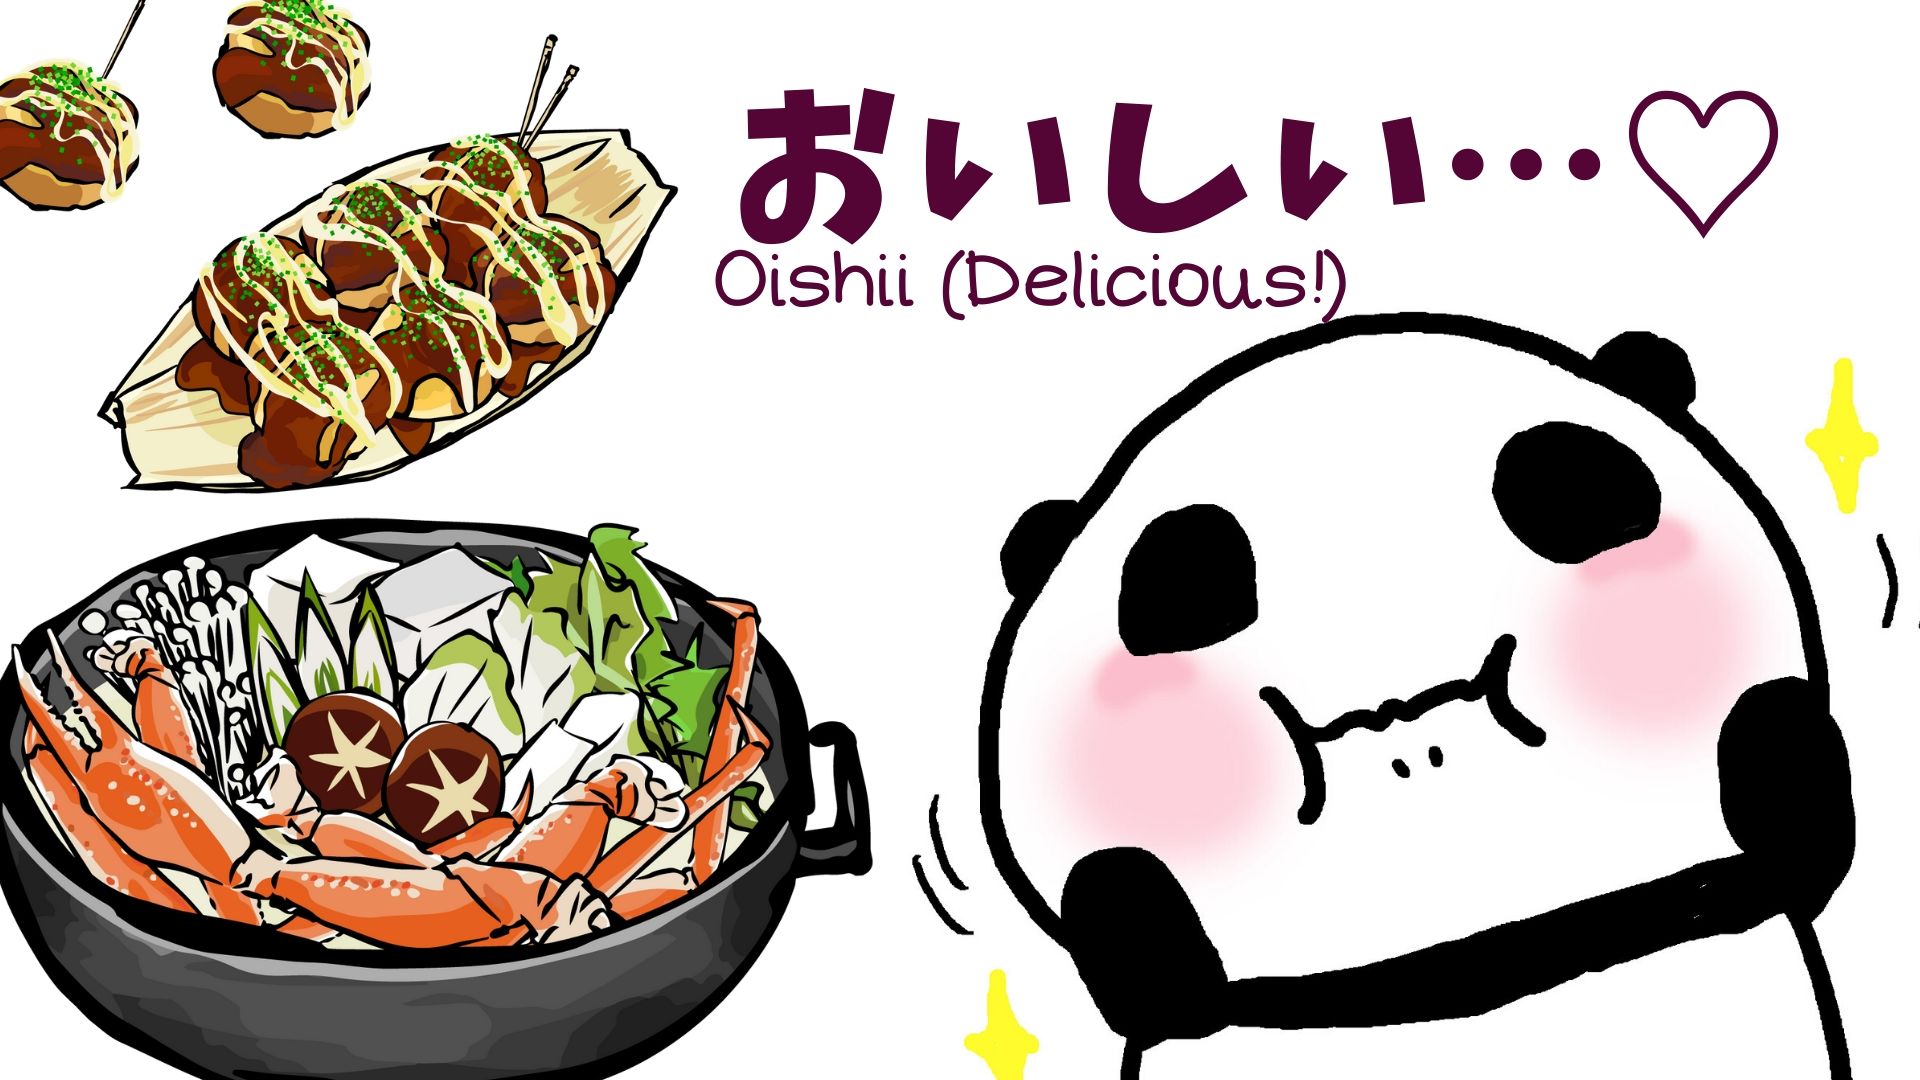 How to say “Delicious!” in Japanese